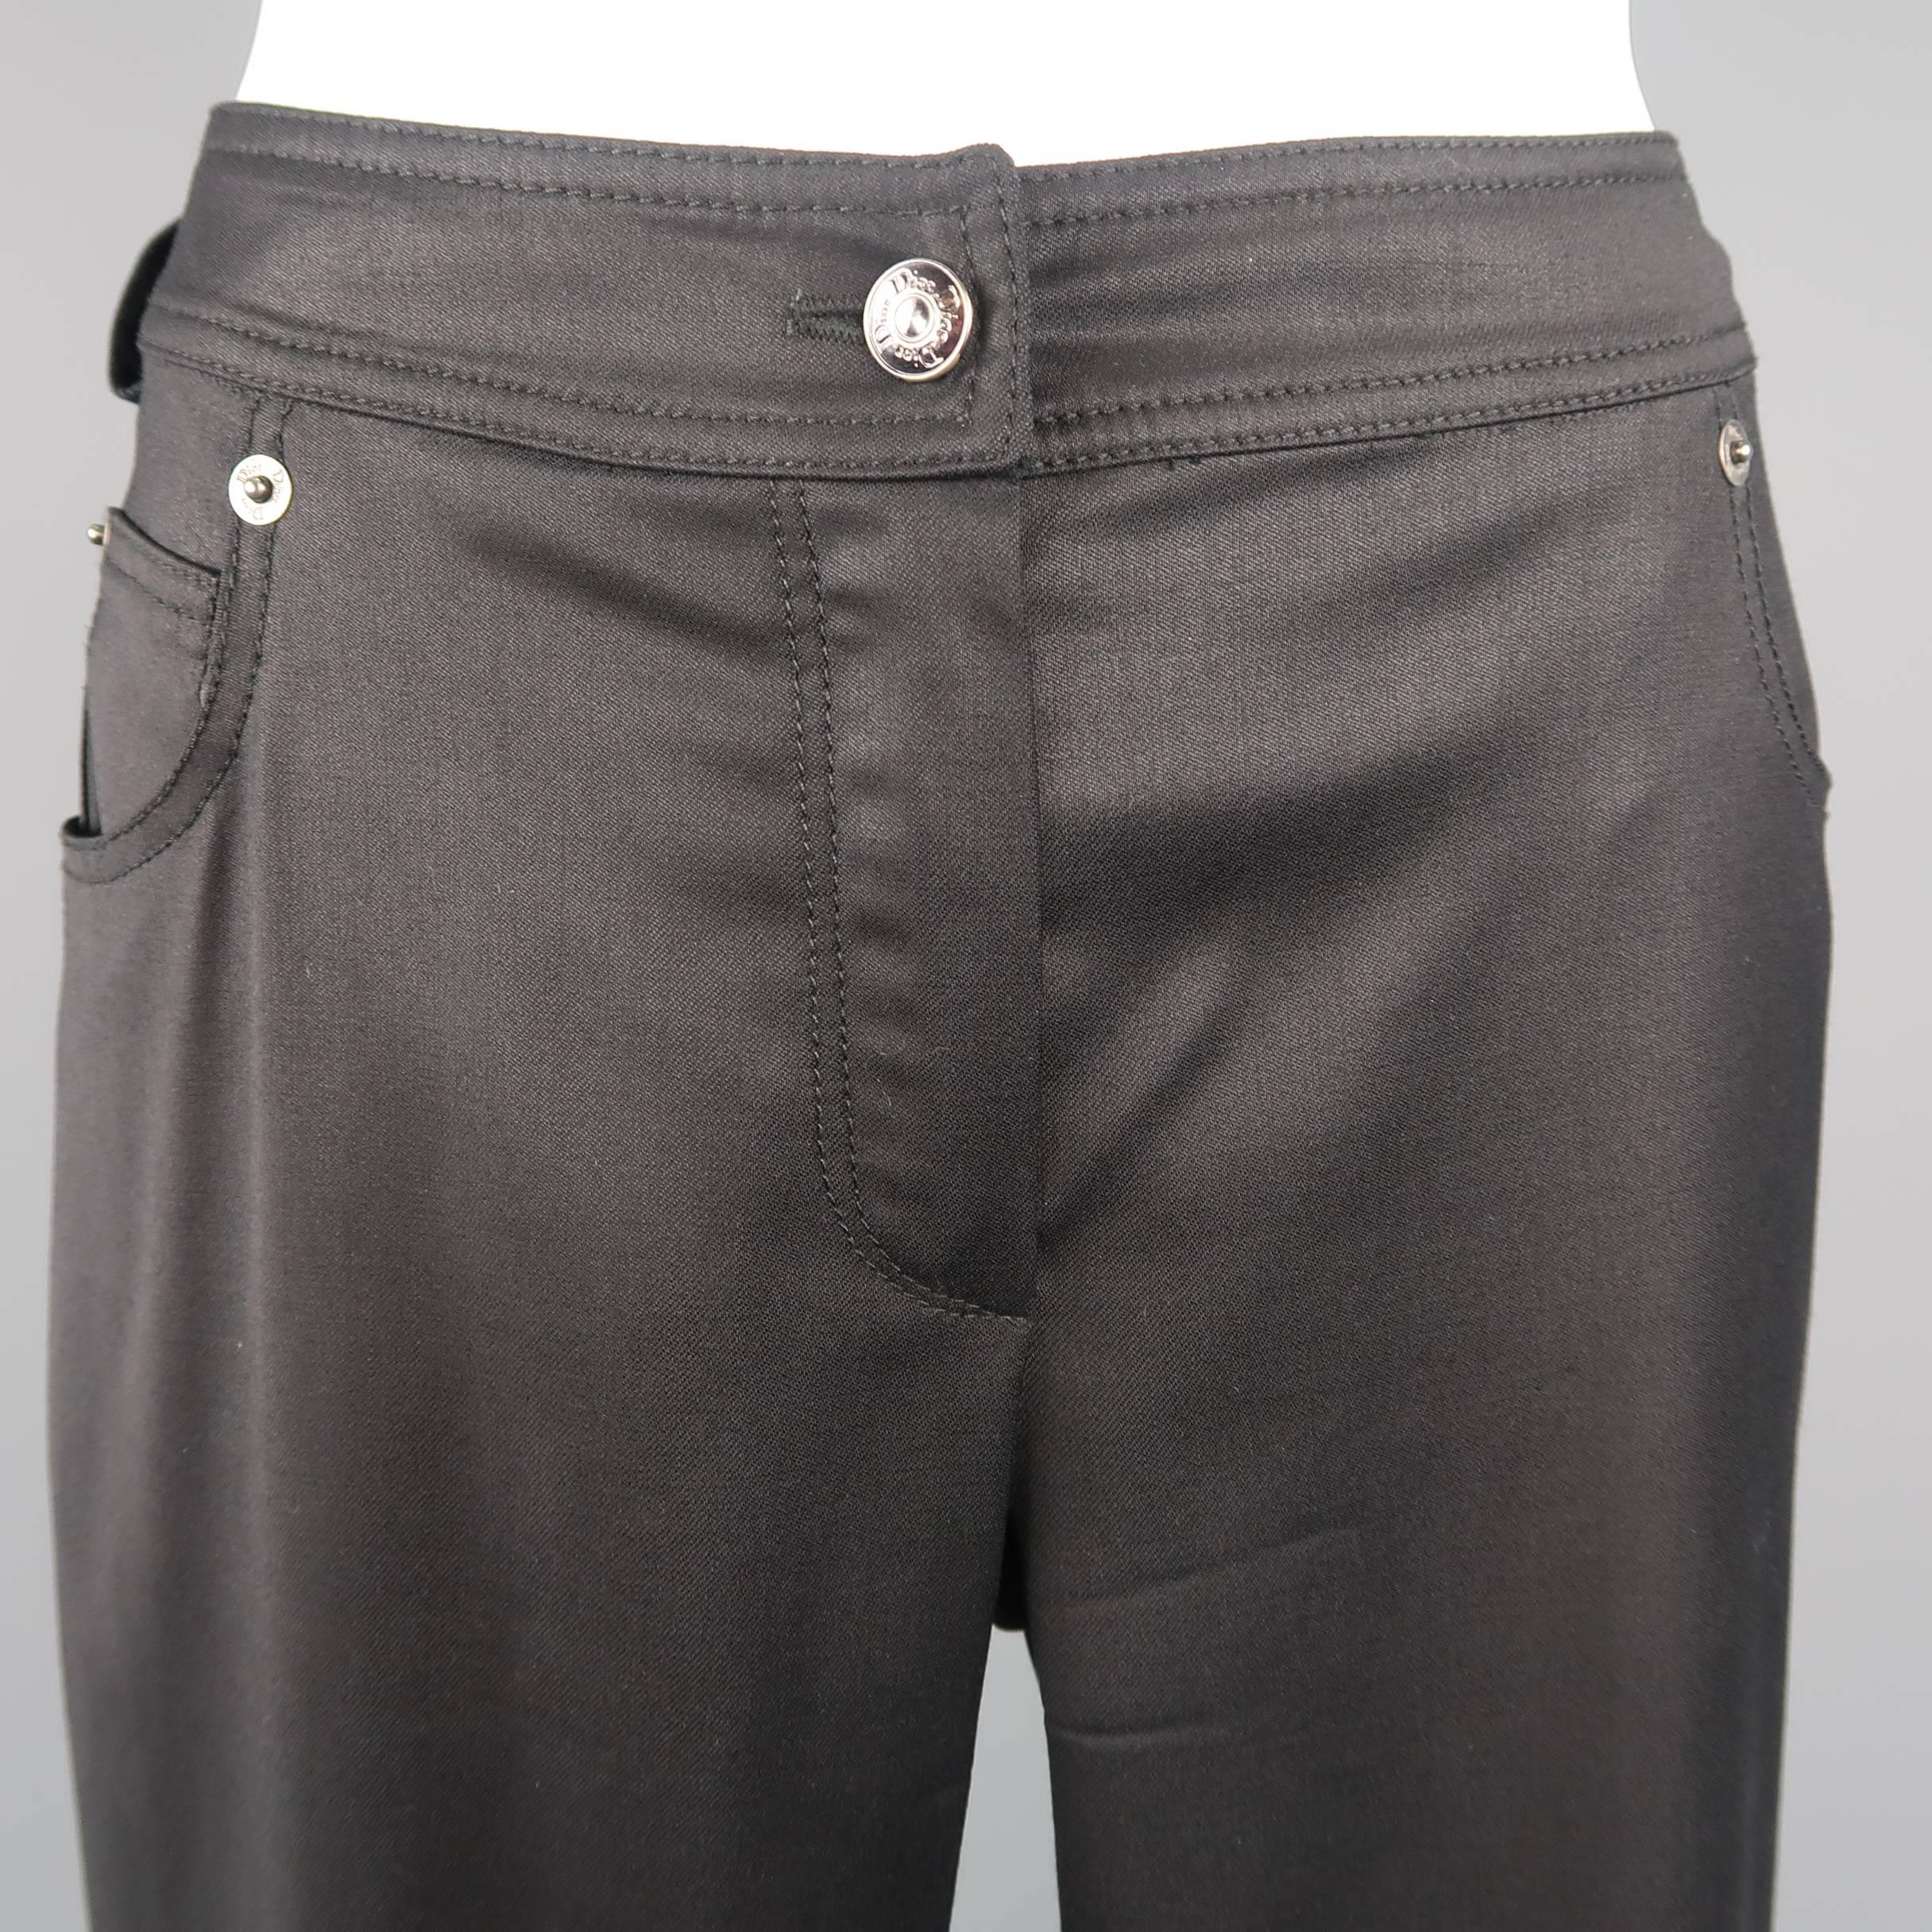 Archive CHRISTIAN DIOR by JOHN GALLIANO pants come in a stretch wool coated twill and feature grommet trim, stretch silk liner, and silver tone buckle accented pockets. Made in France.
 
Good Pre-Owned Condition.
Marked: 6
 
Measurements:
 
Waist: